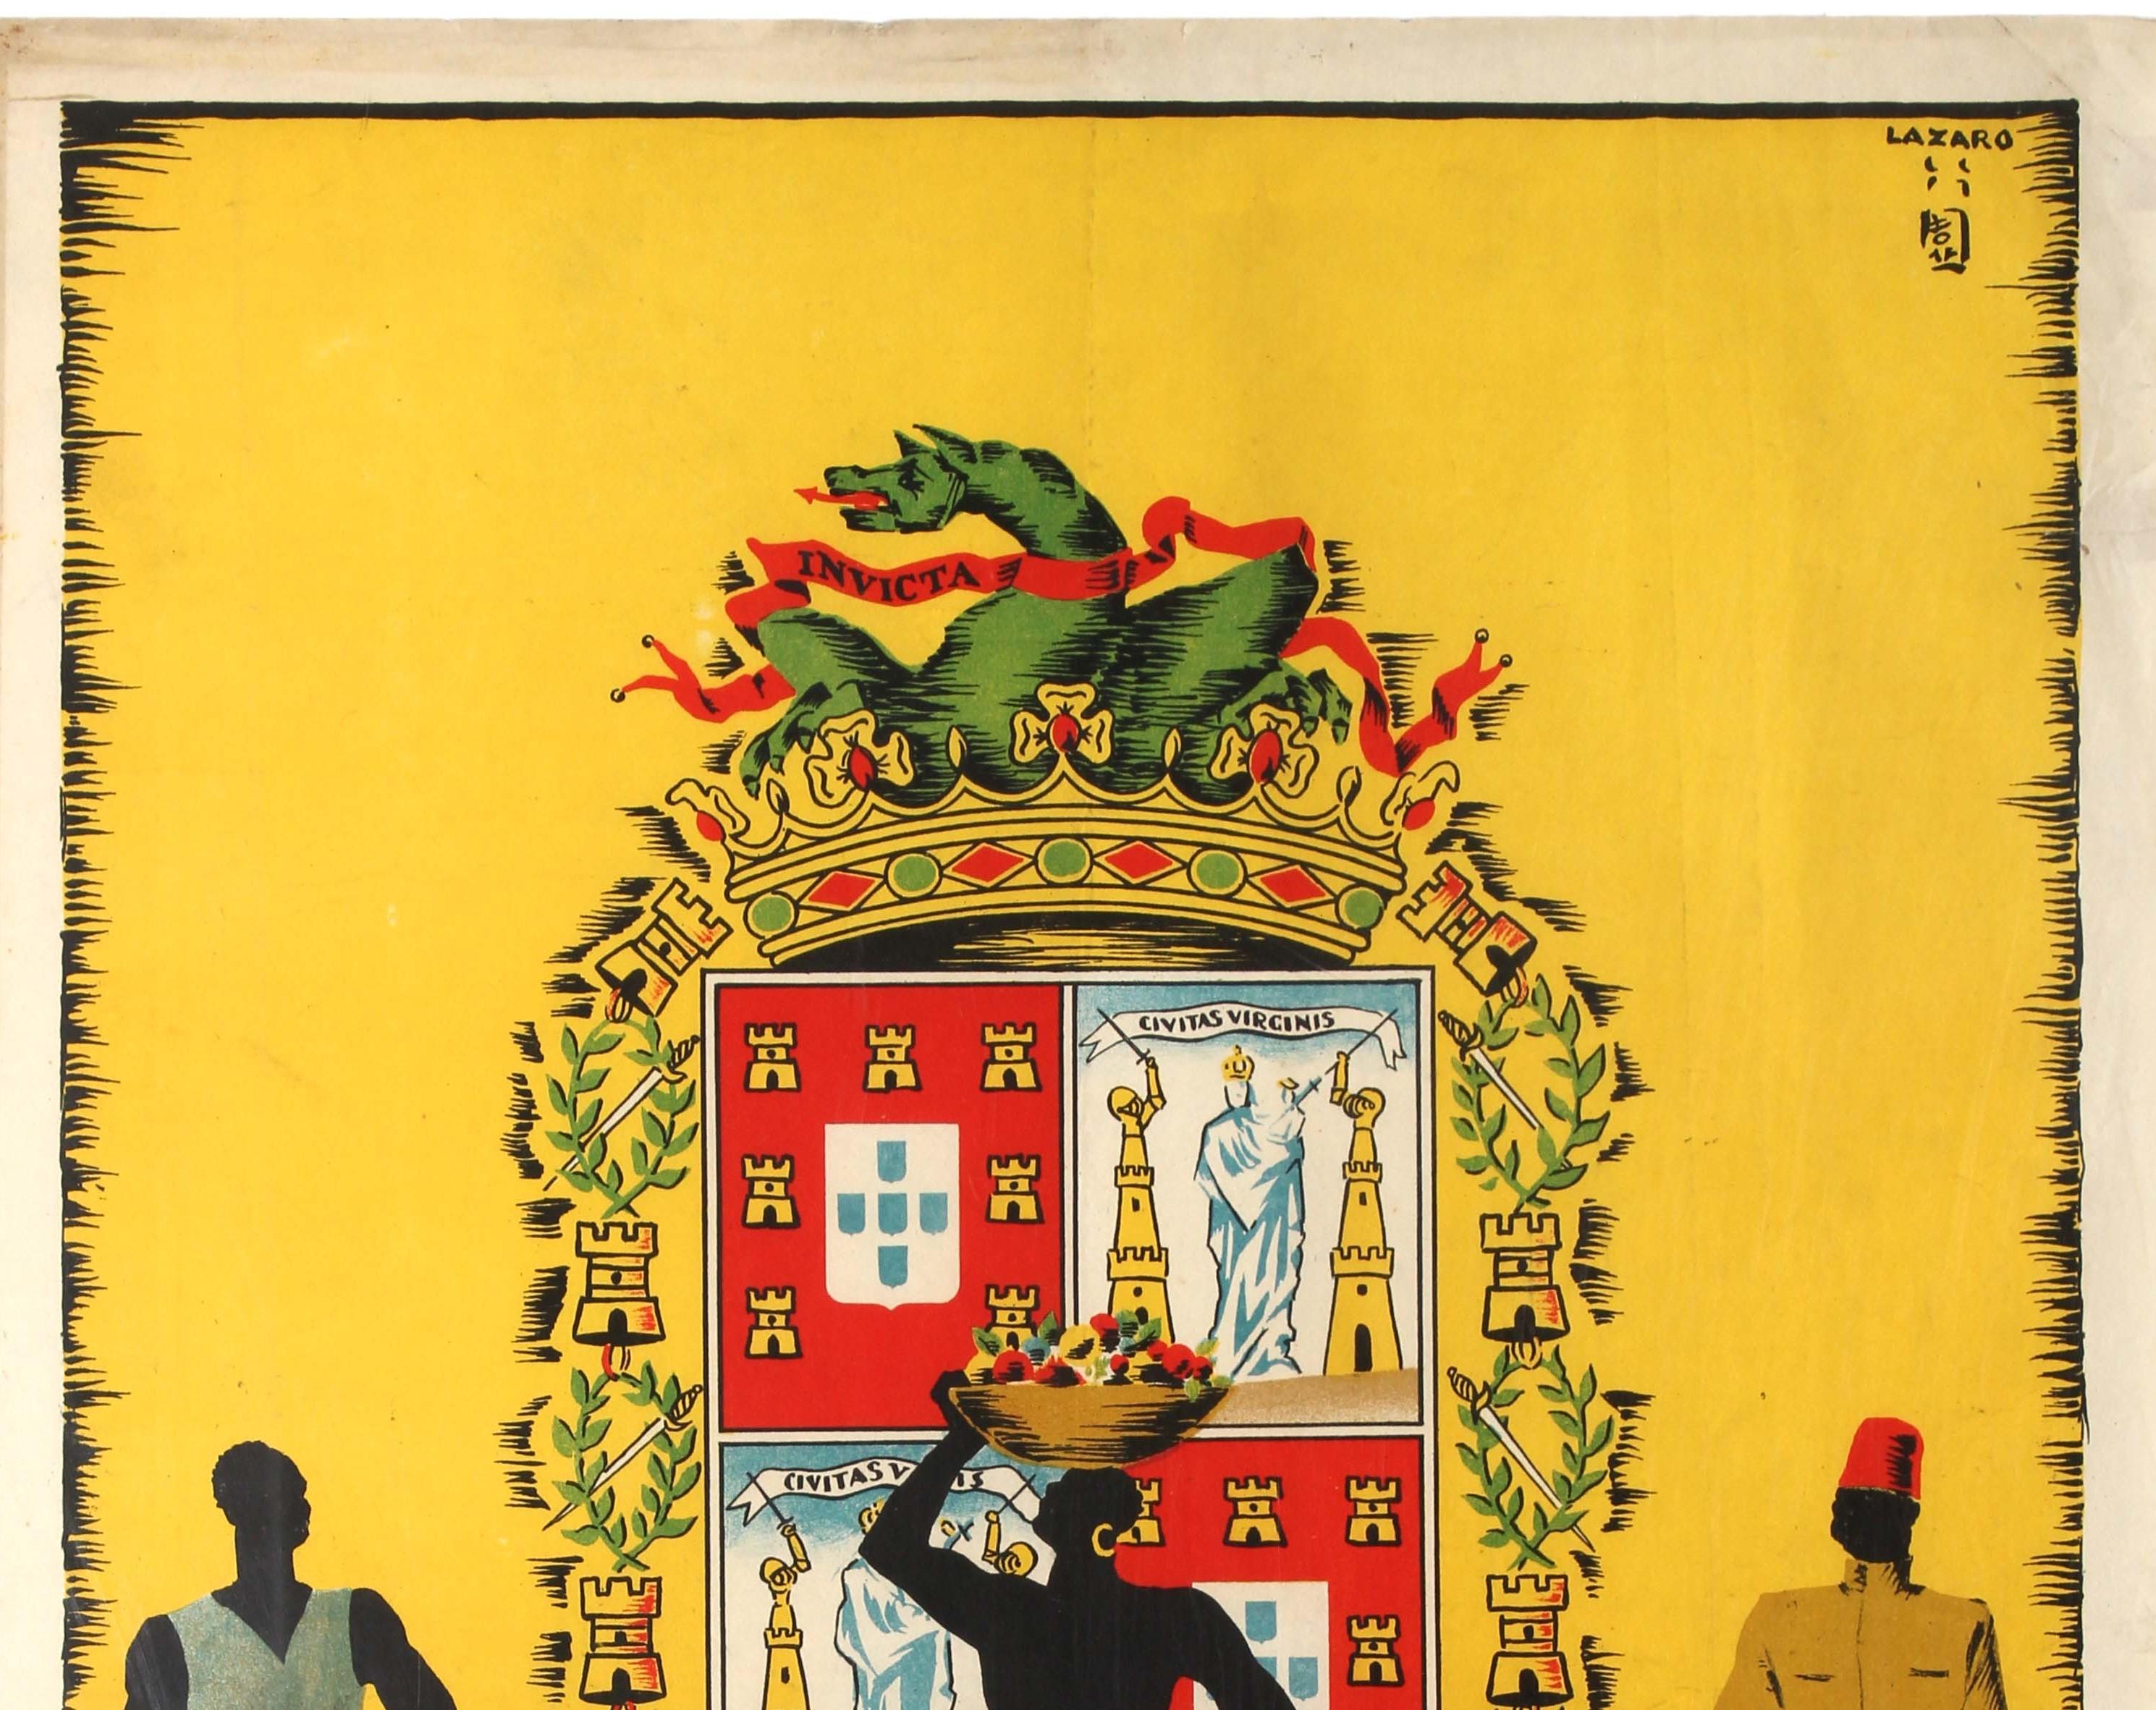 Original vintage travel advertising poster for the Colonial Exhibition / Exposicao Colonial in Porto Portugal in 1934, a world fair showcasing Portugal's colonies in Africa and Asia with the exhibits including a reproduction lighthouse and villages,